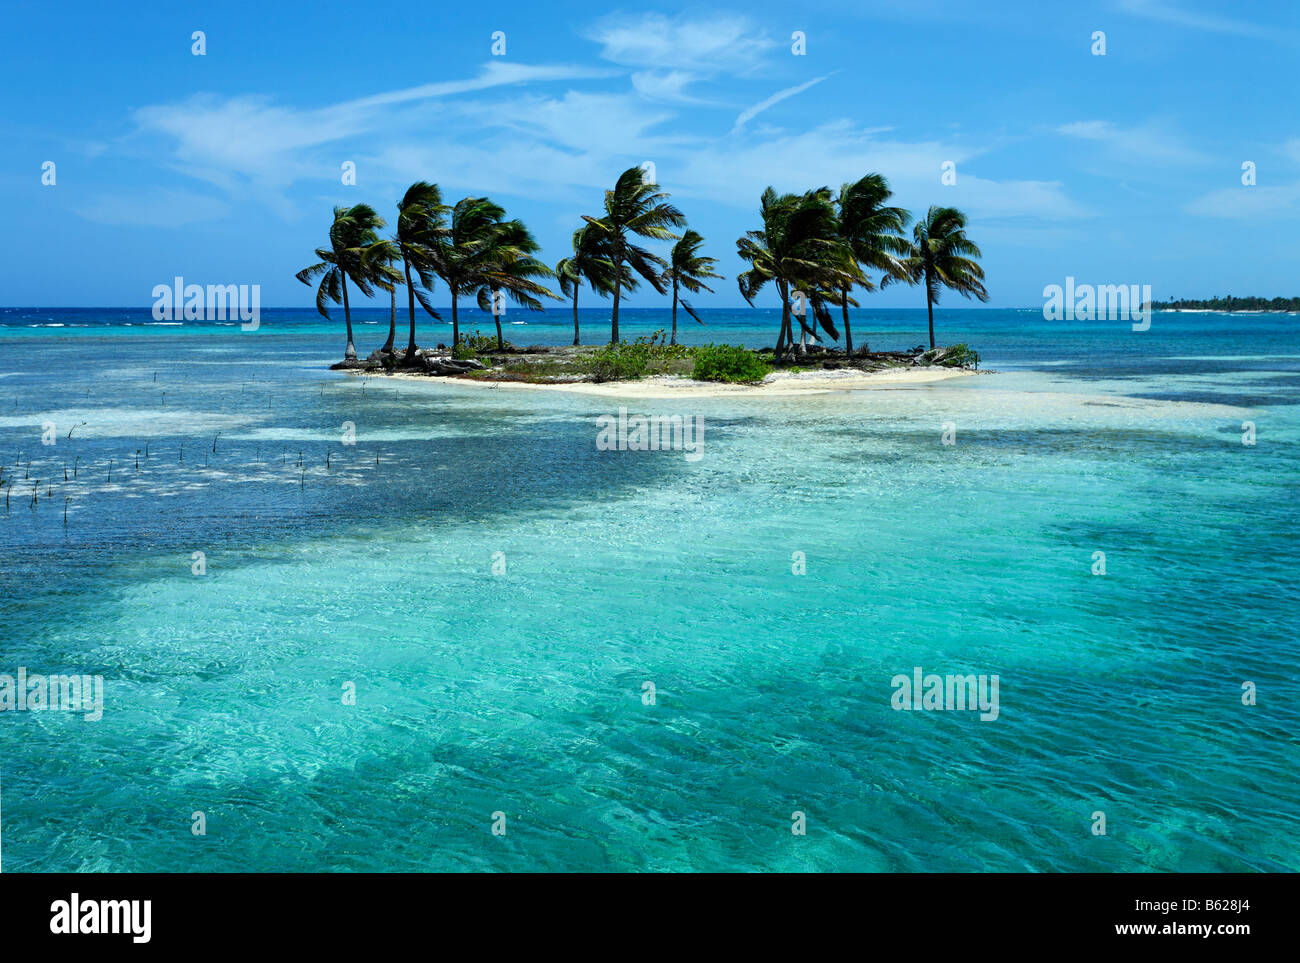 Small palm island in a lagoon, Turneffe Atoll, Belize, Central America, Caribbean Stock Photo